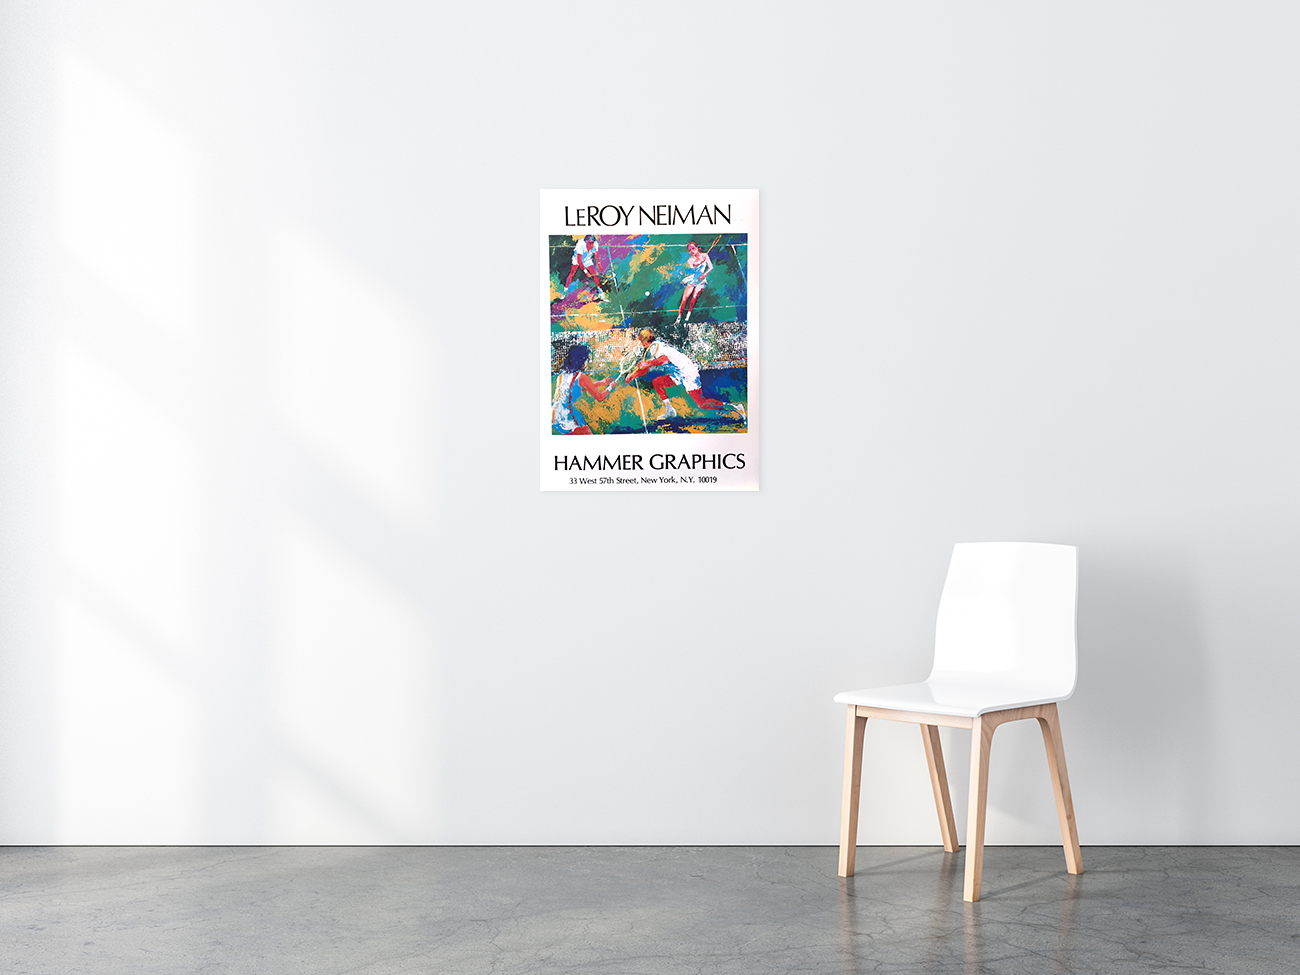 Mixed Doubles Tennis poster in situ